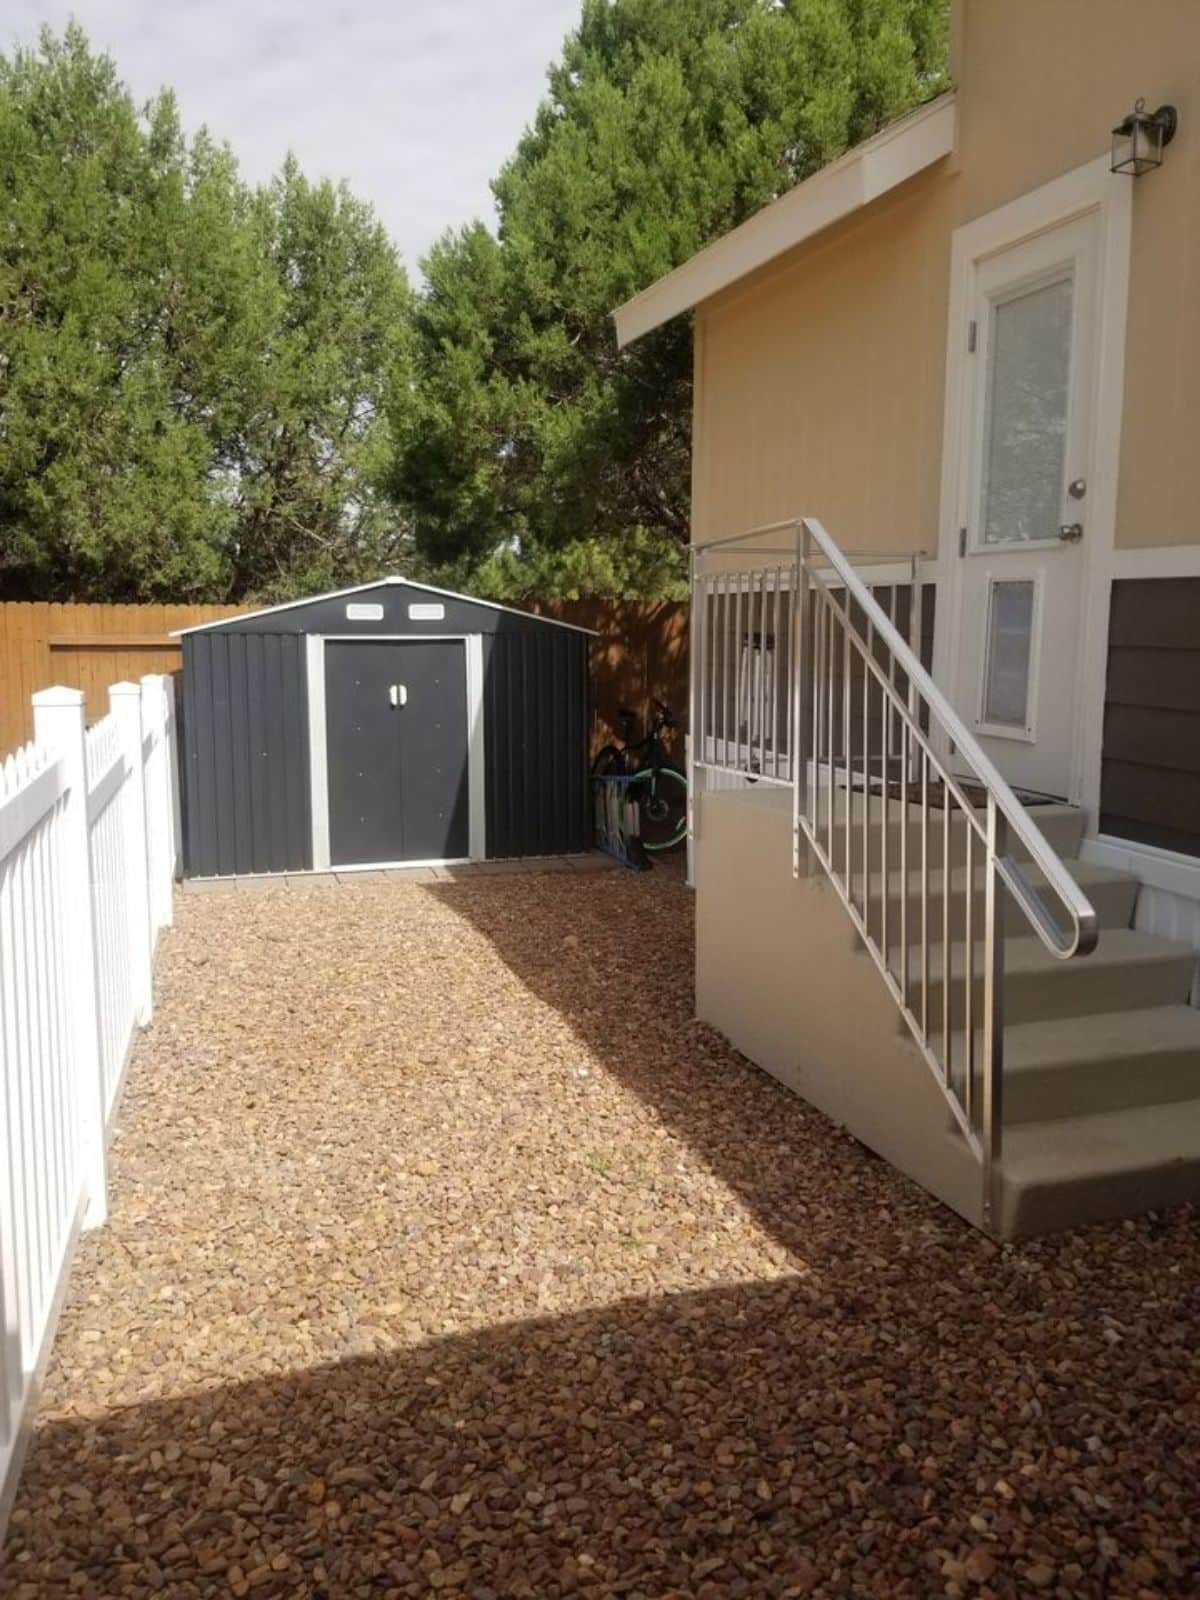 Back gate and additional storage area outside the Spacious Tiny House